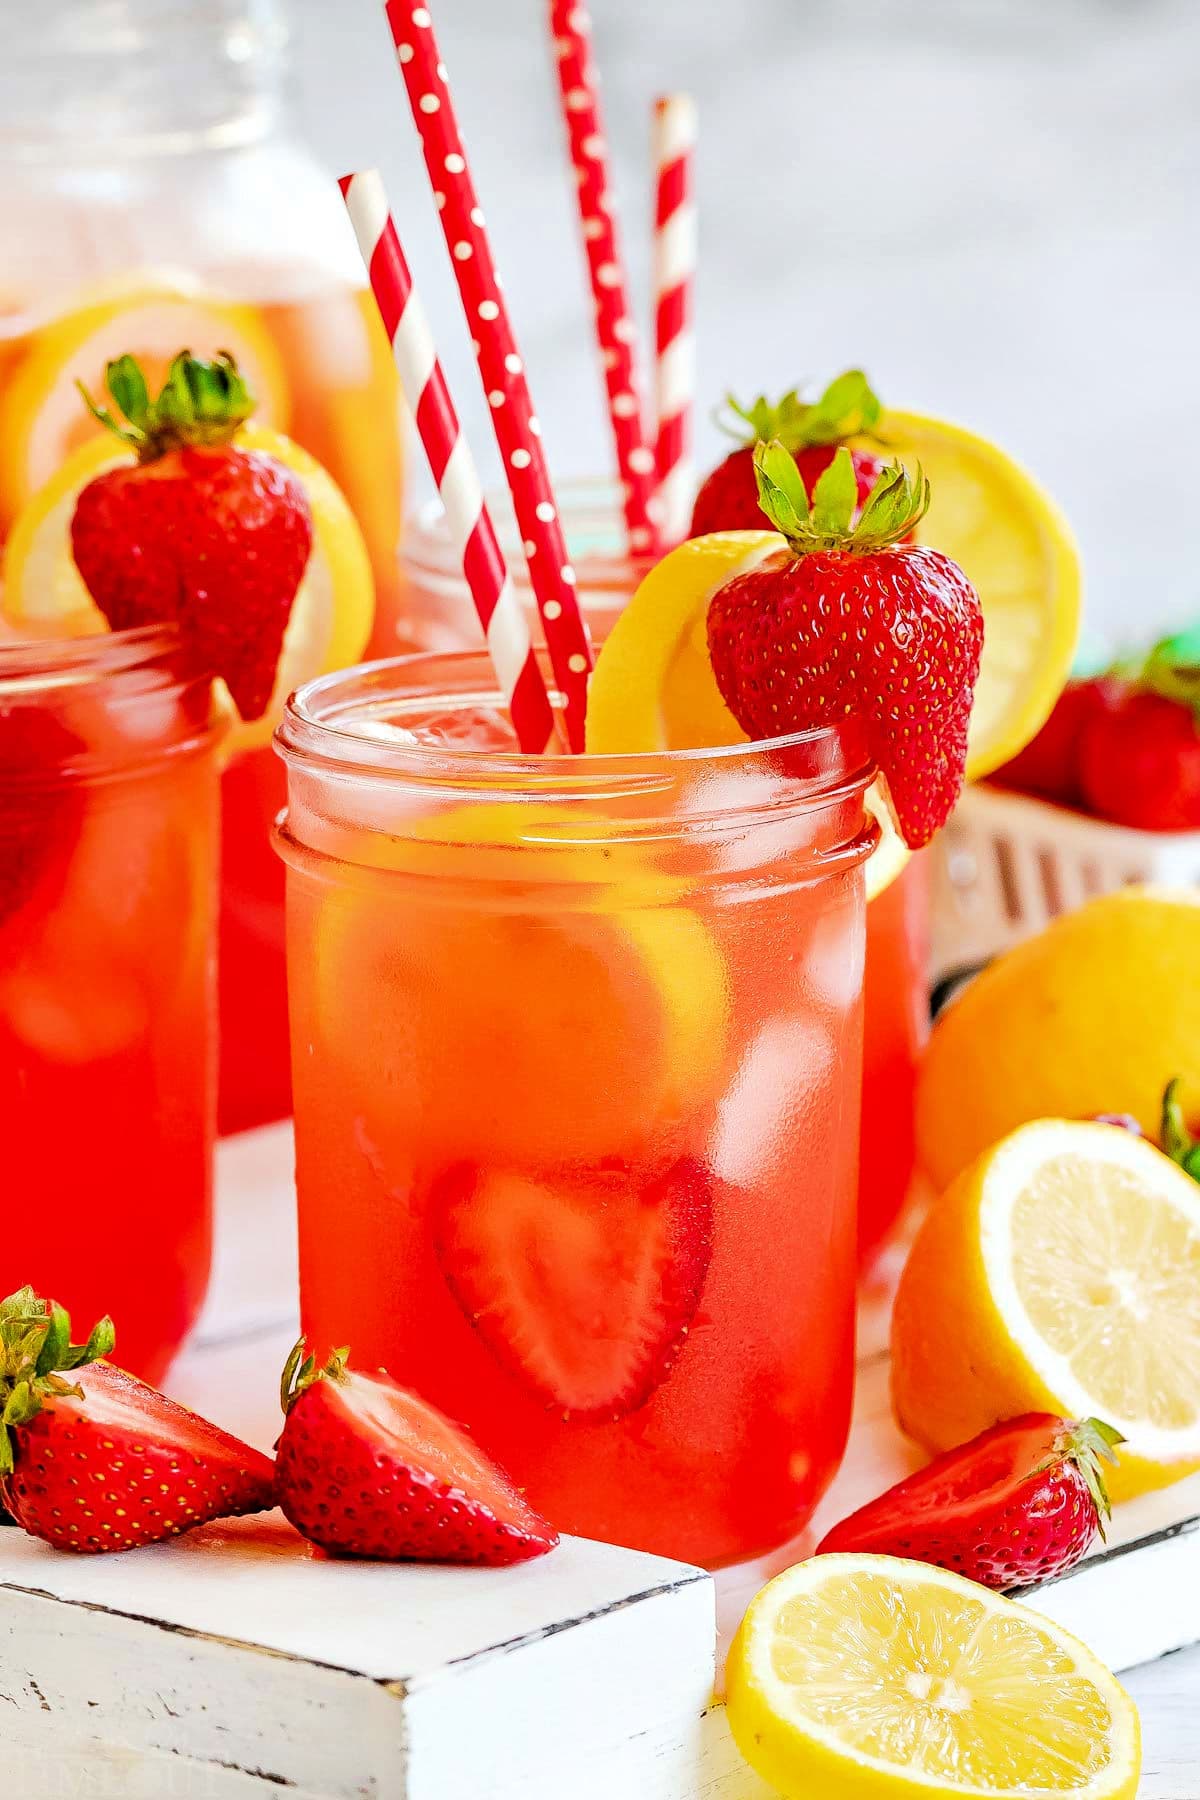 mason jars filled with strawberry lemonade and topped with lemon slices and fresh strawberries. Red and white paper straws in jars.